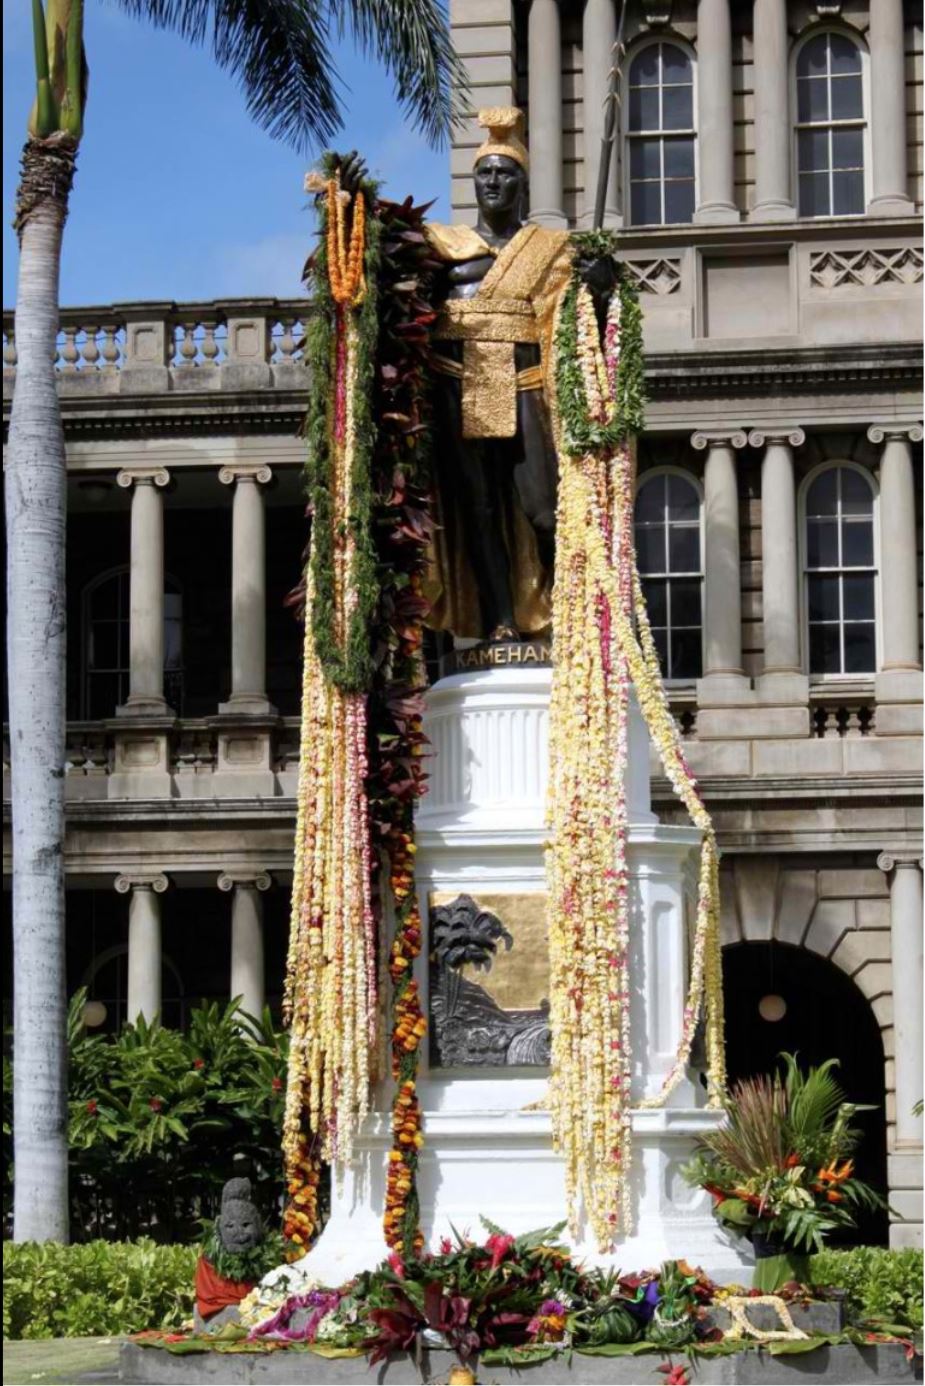 A statue of King Kamehameha I in front of the legislative buildings of Hawaii is draped in flowers every June 11 in commemoration of Kamehameha Day